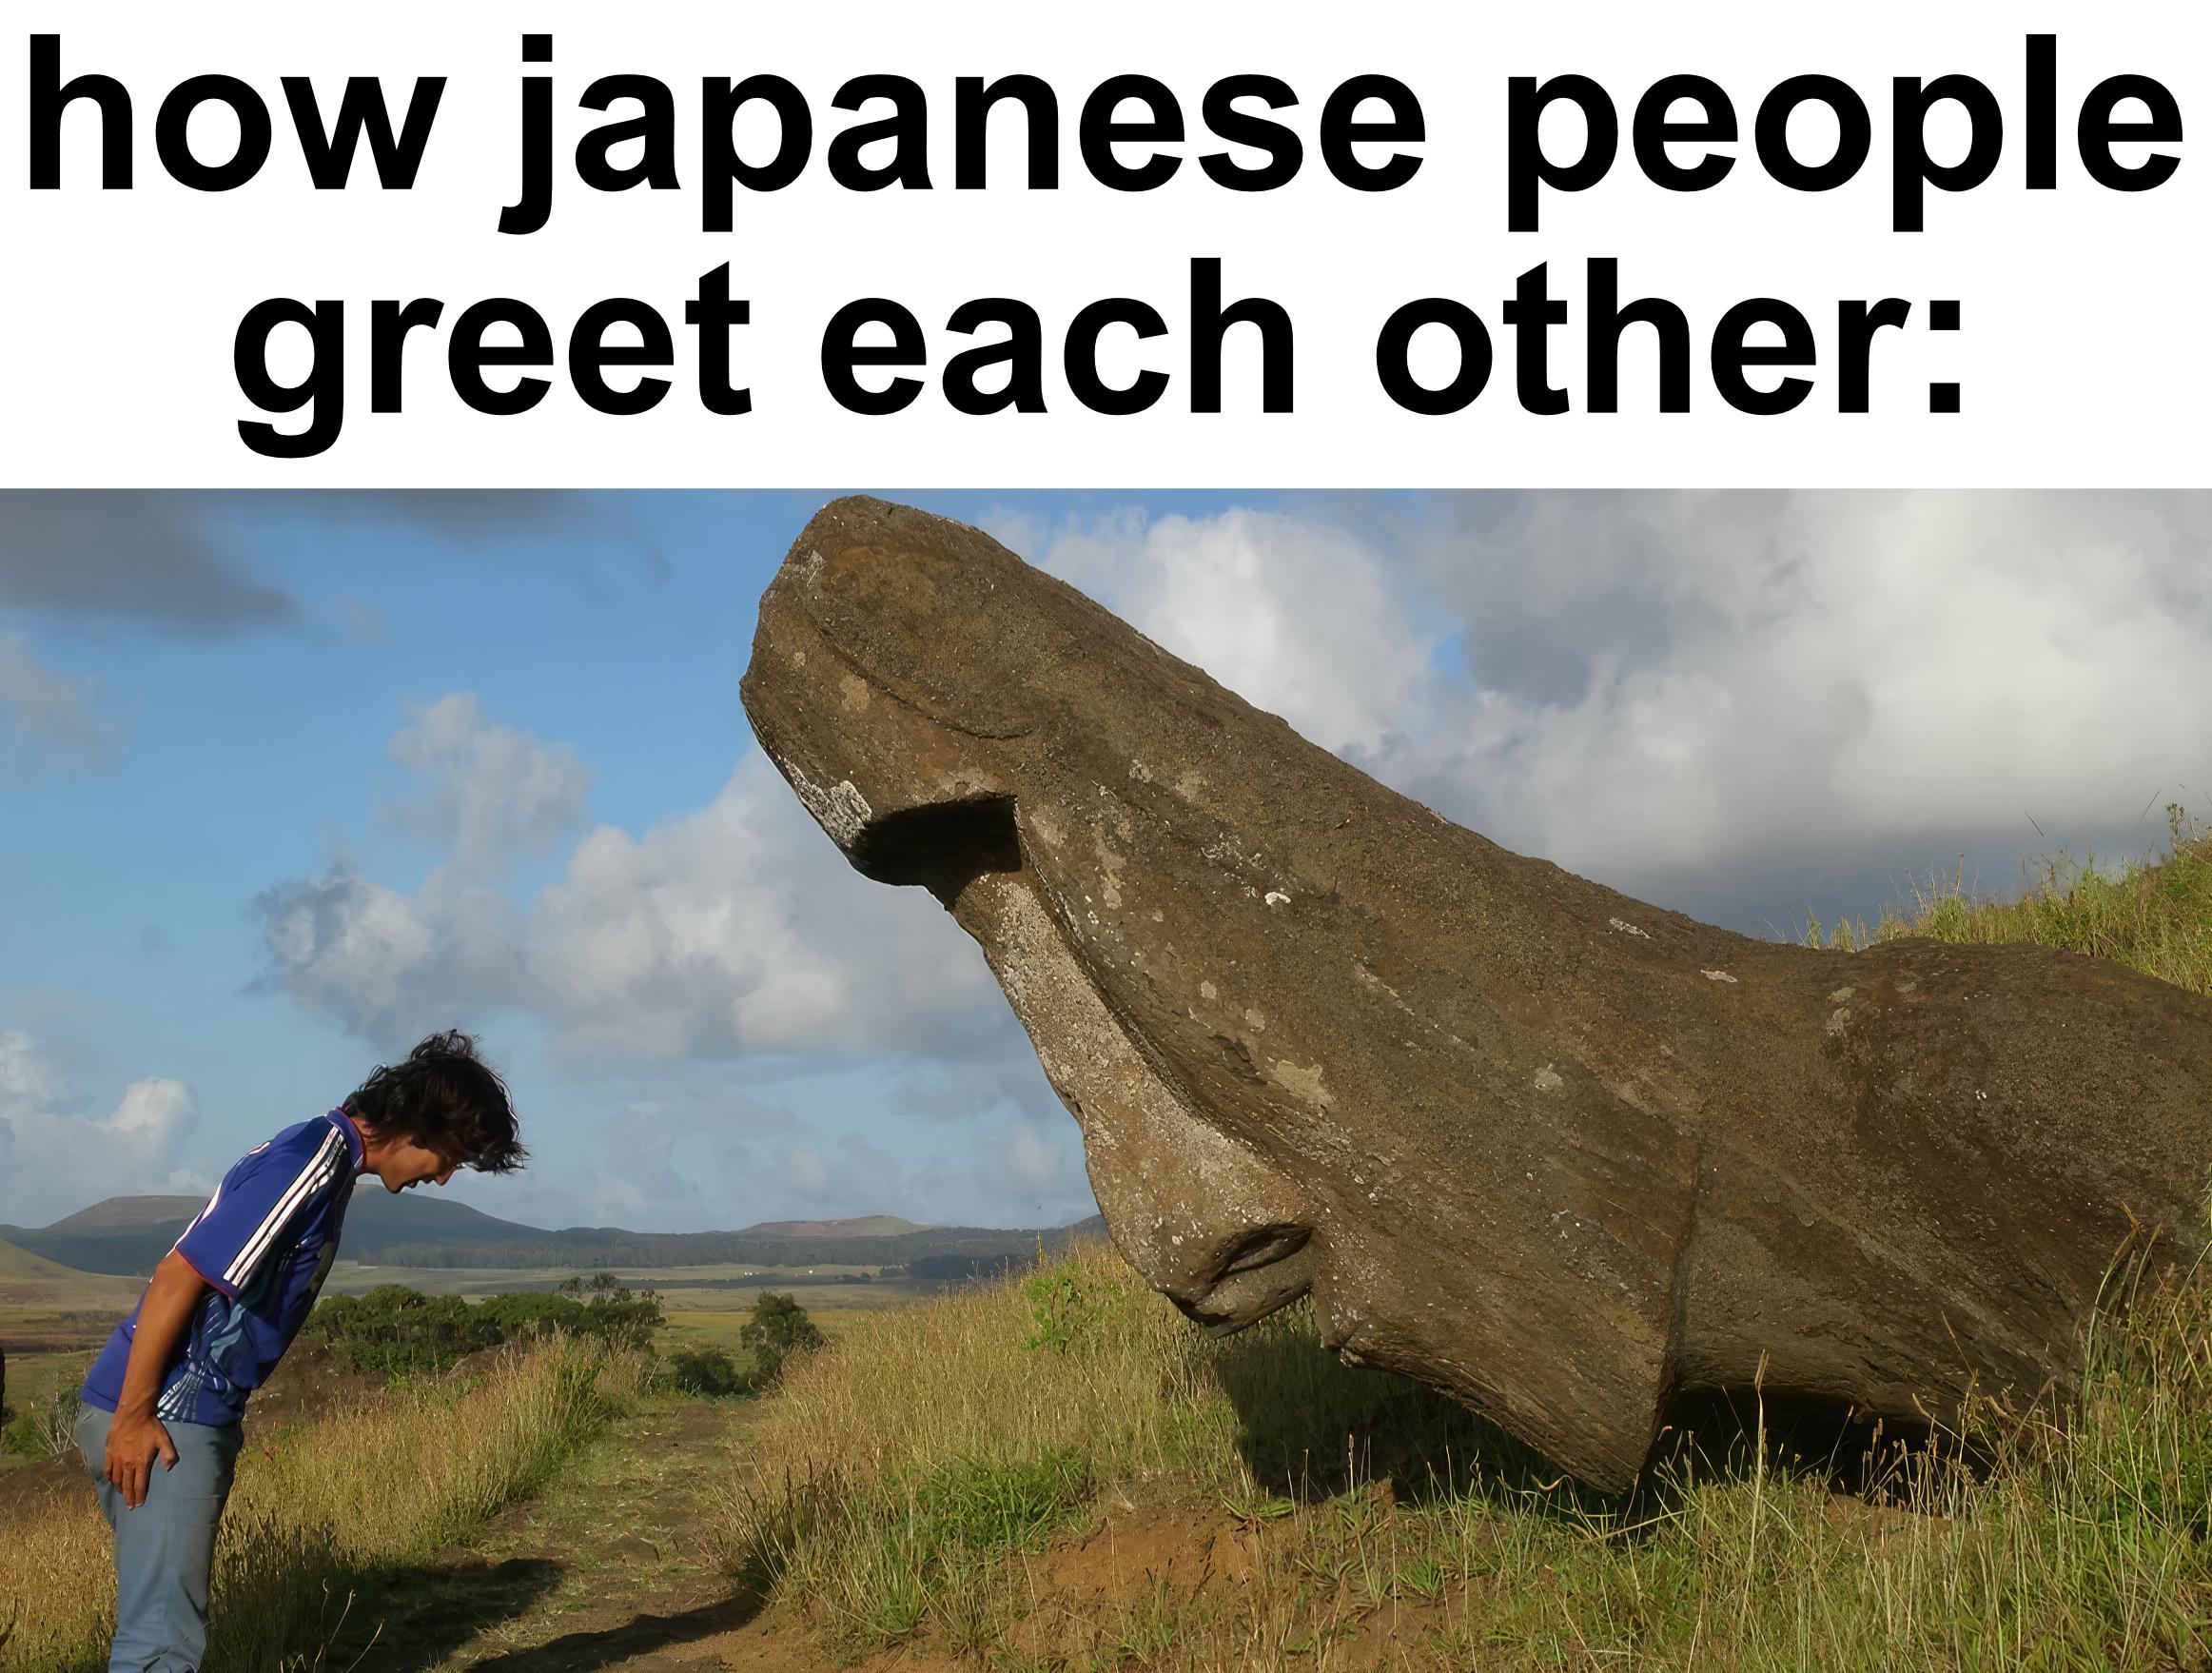 funny memes and pics - outcrop - how japanese people greet each other